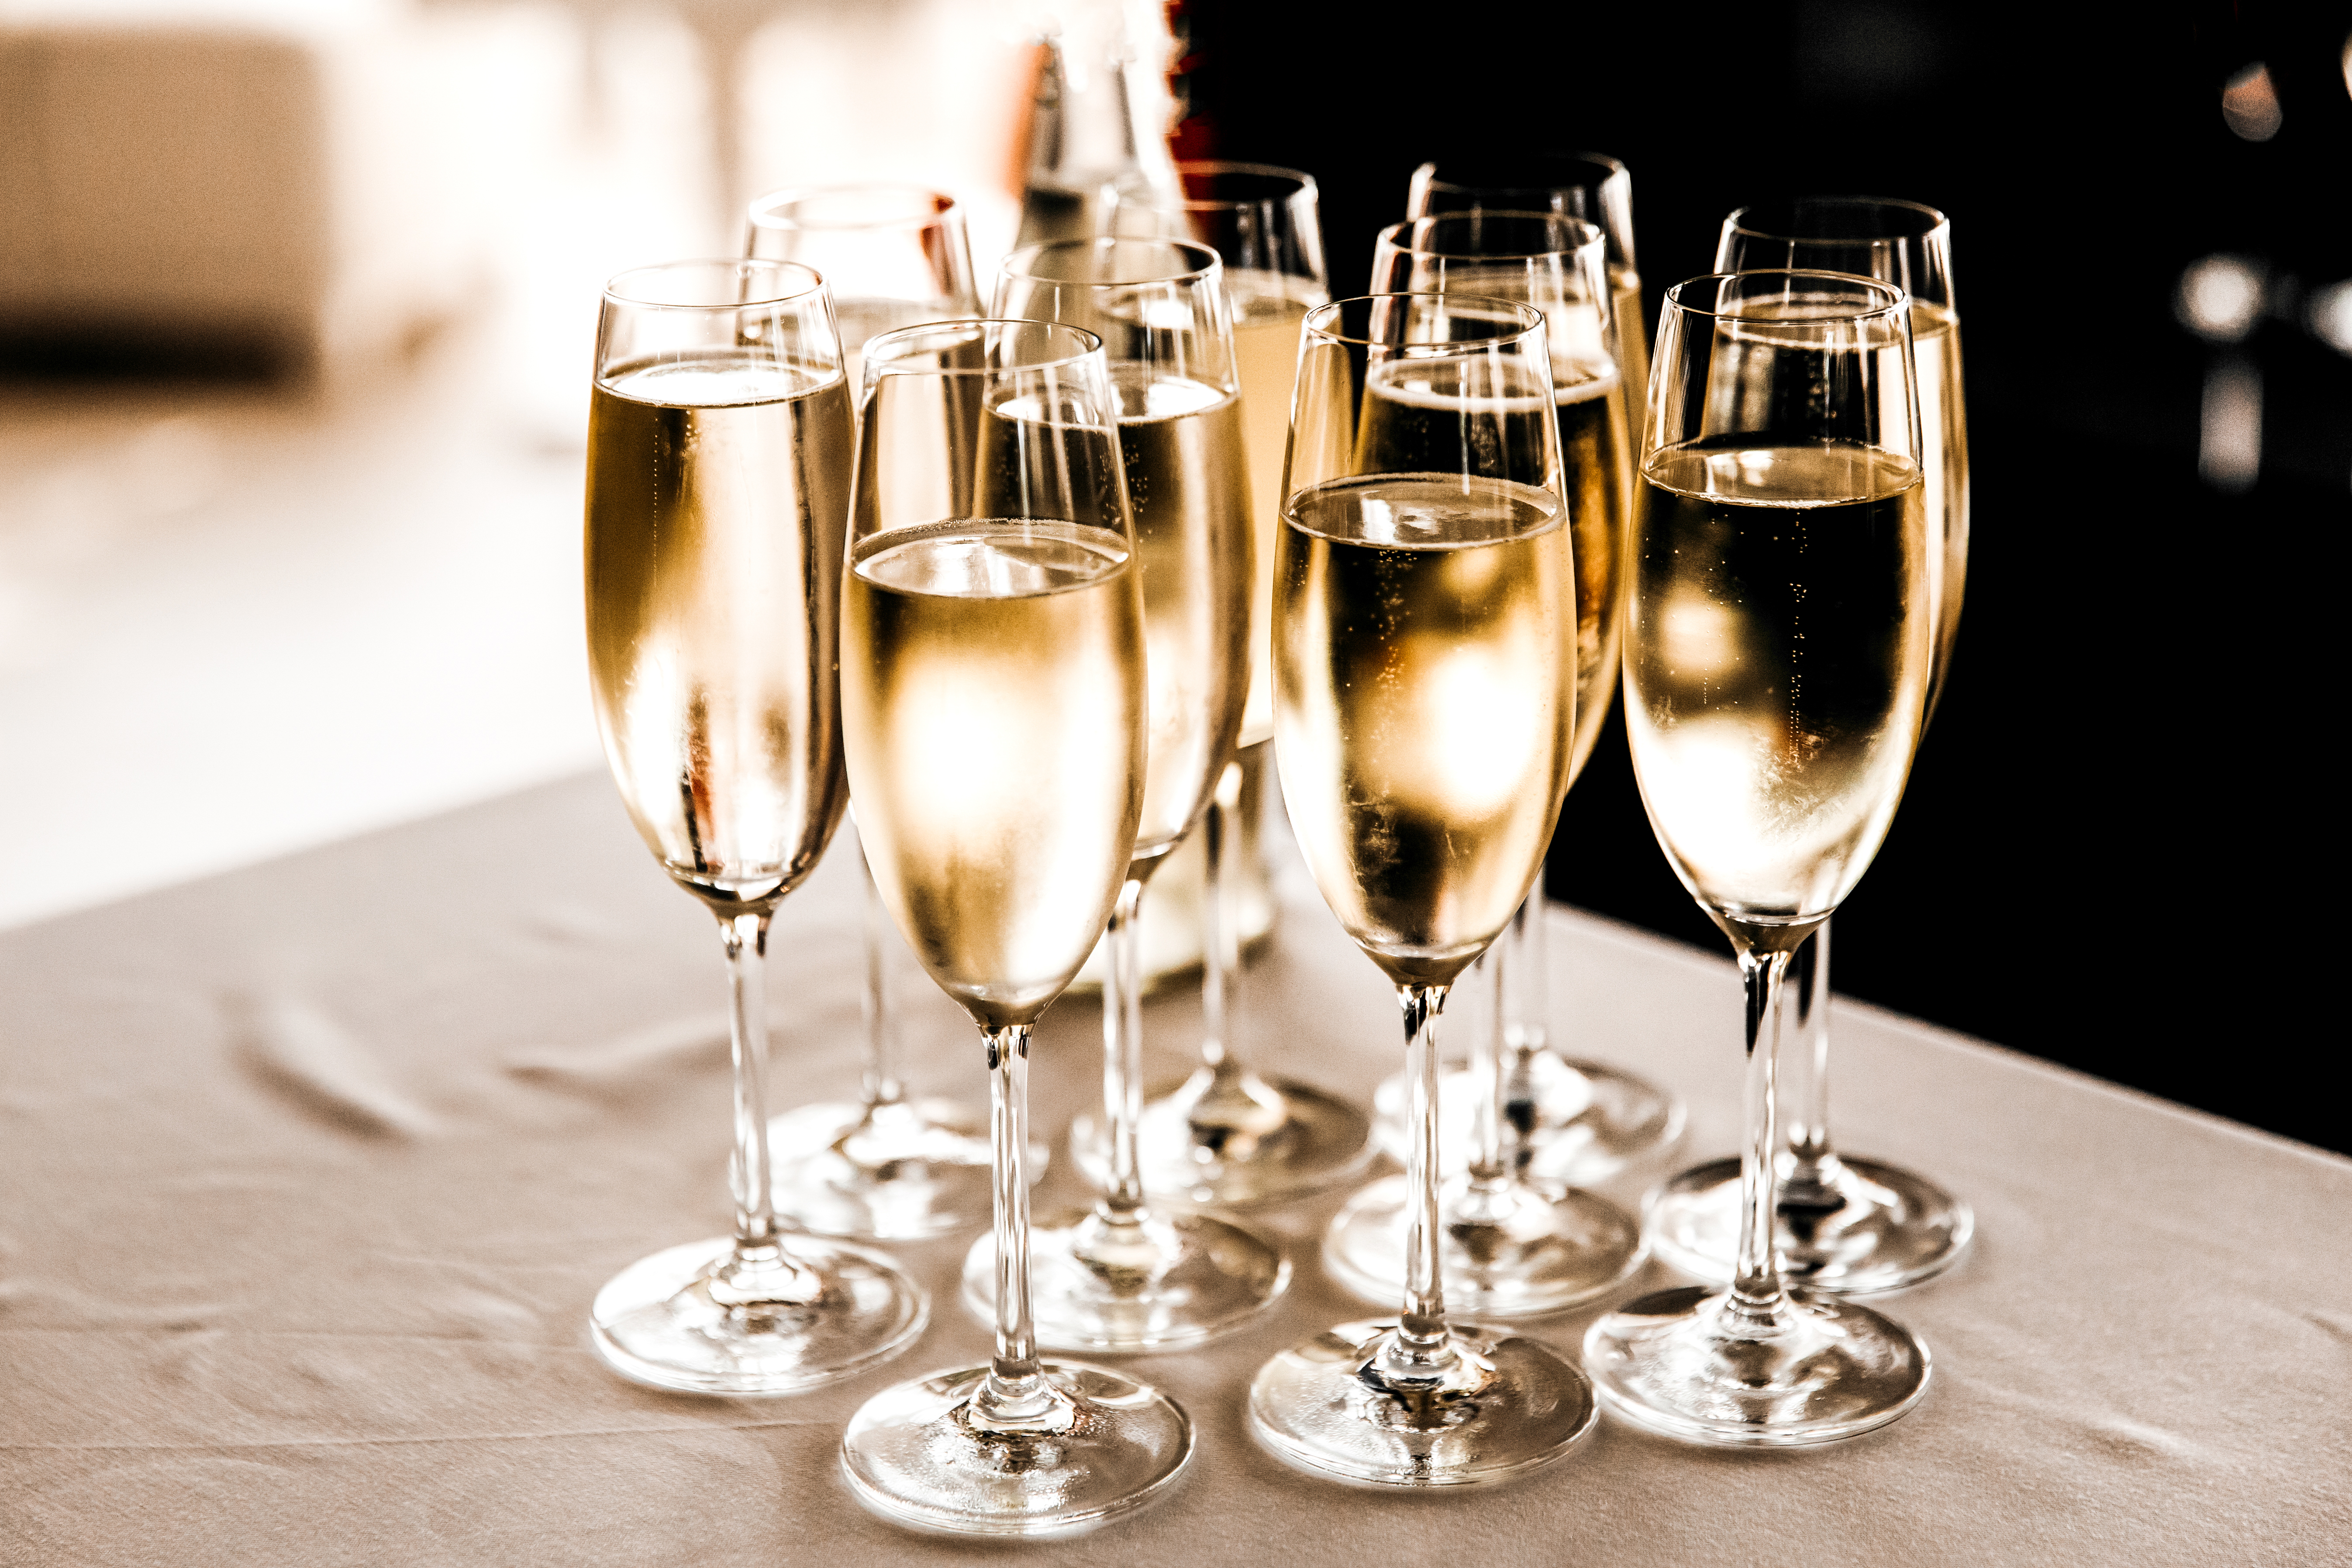 Champagne flutes filled with Champagne on a table